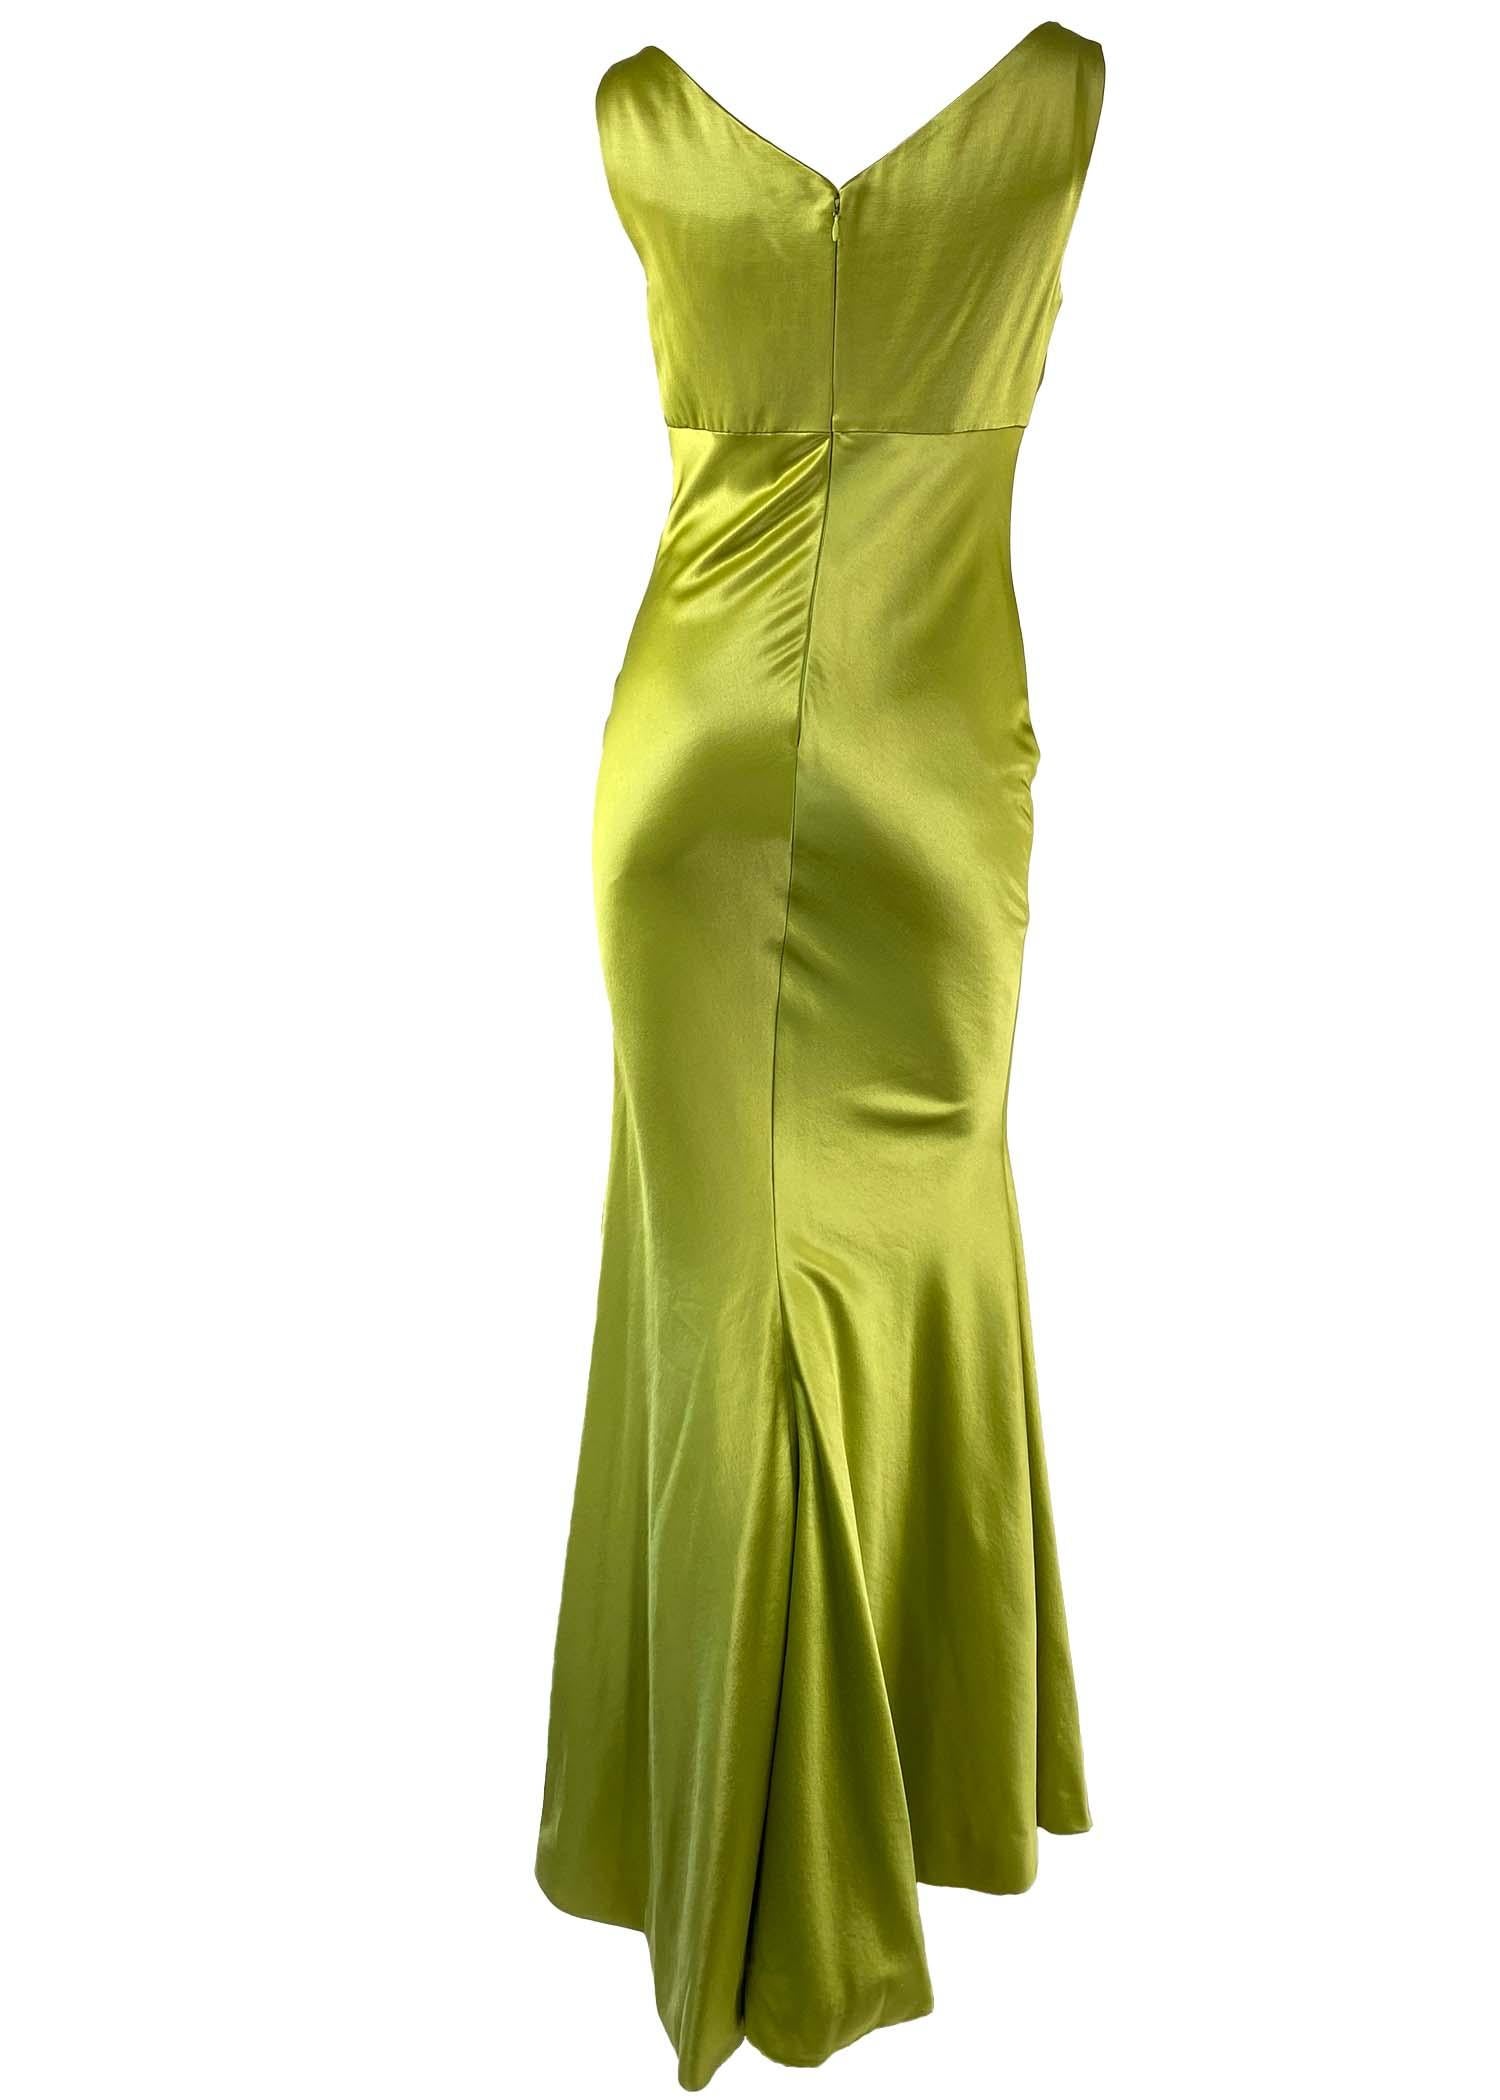 F/W 1995 Gianni Versace Chartreuse Green Silk Gown Dress Runway Documented 7